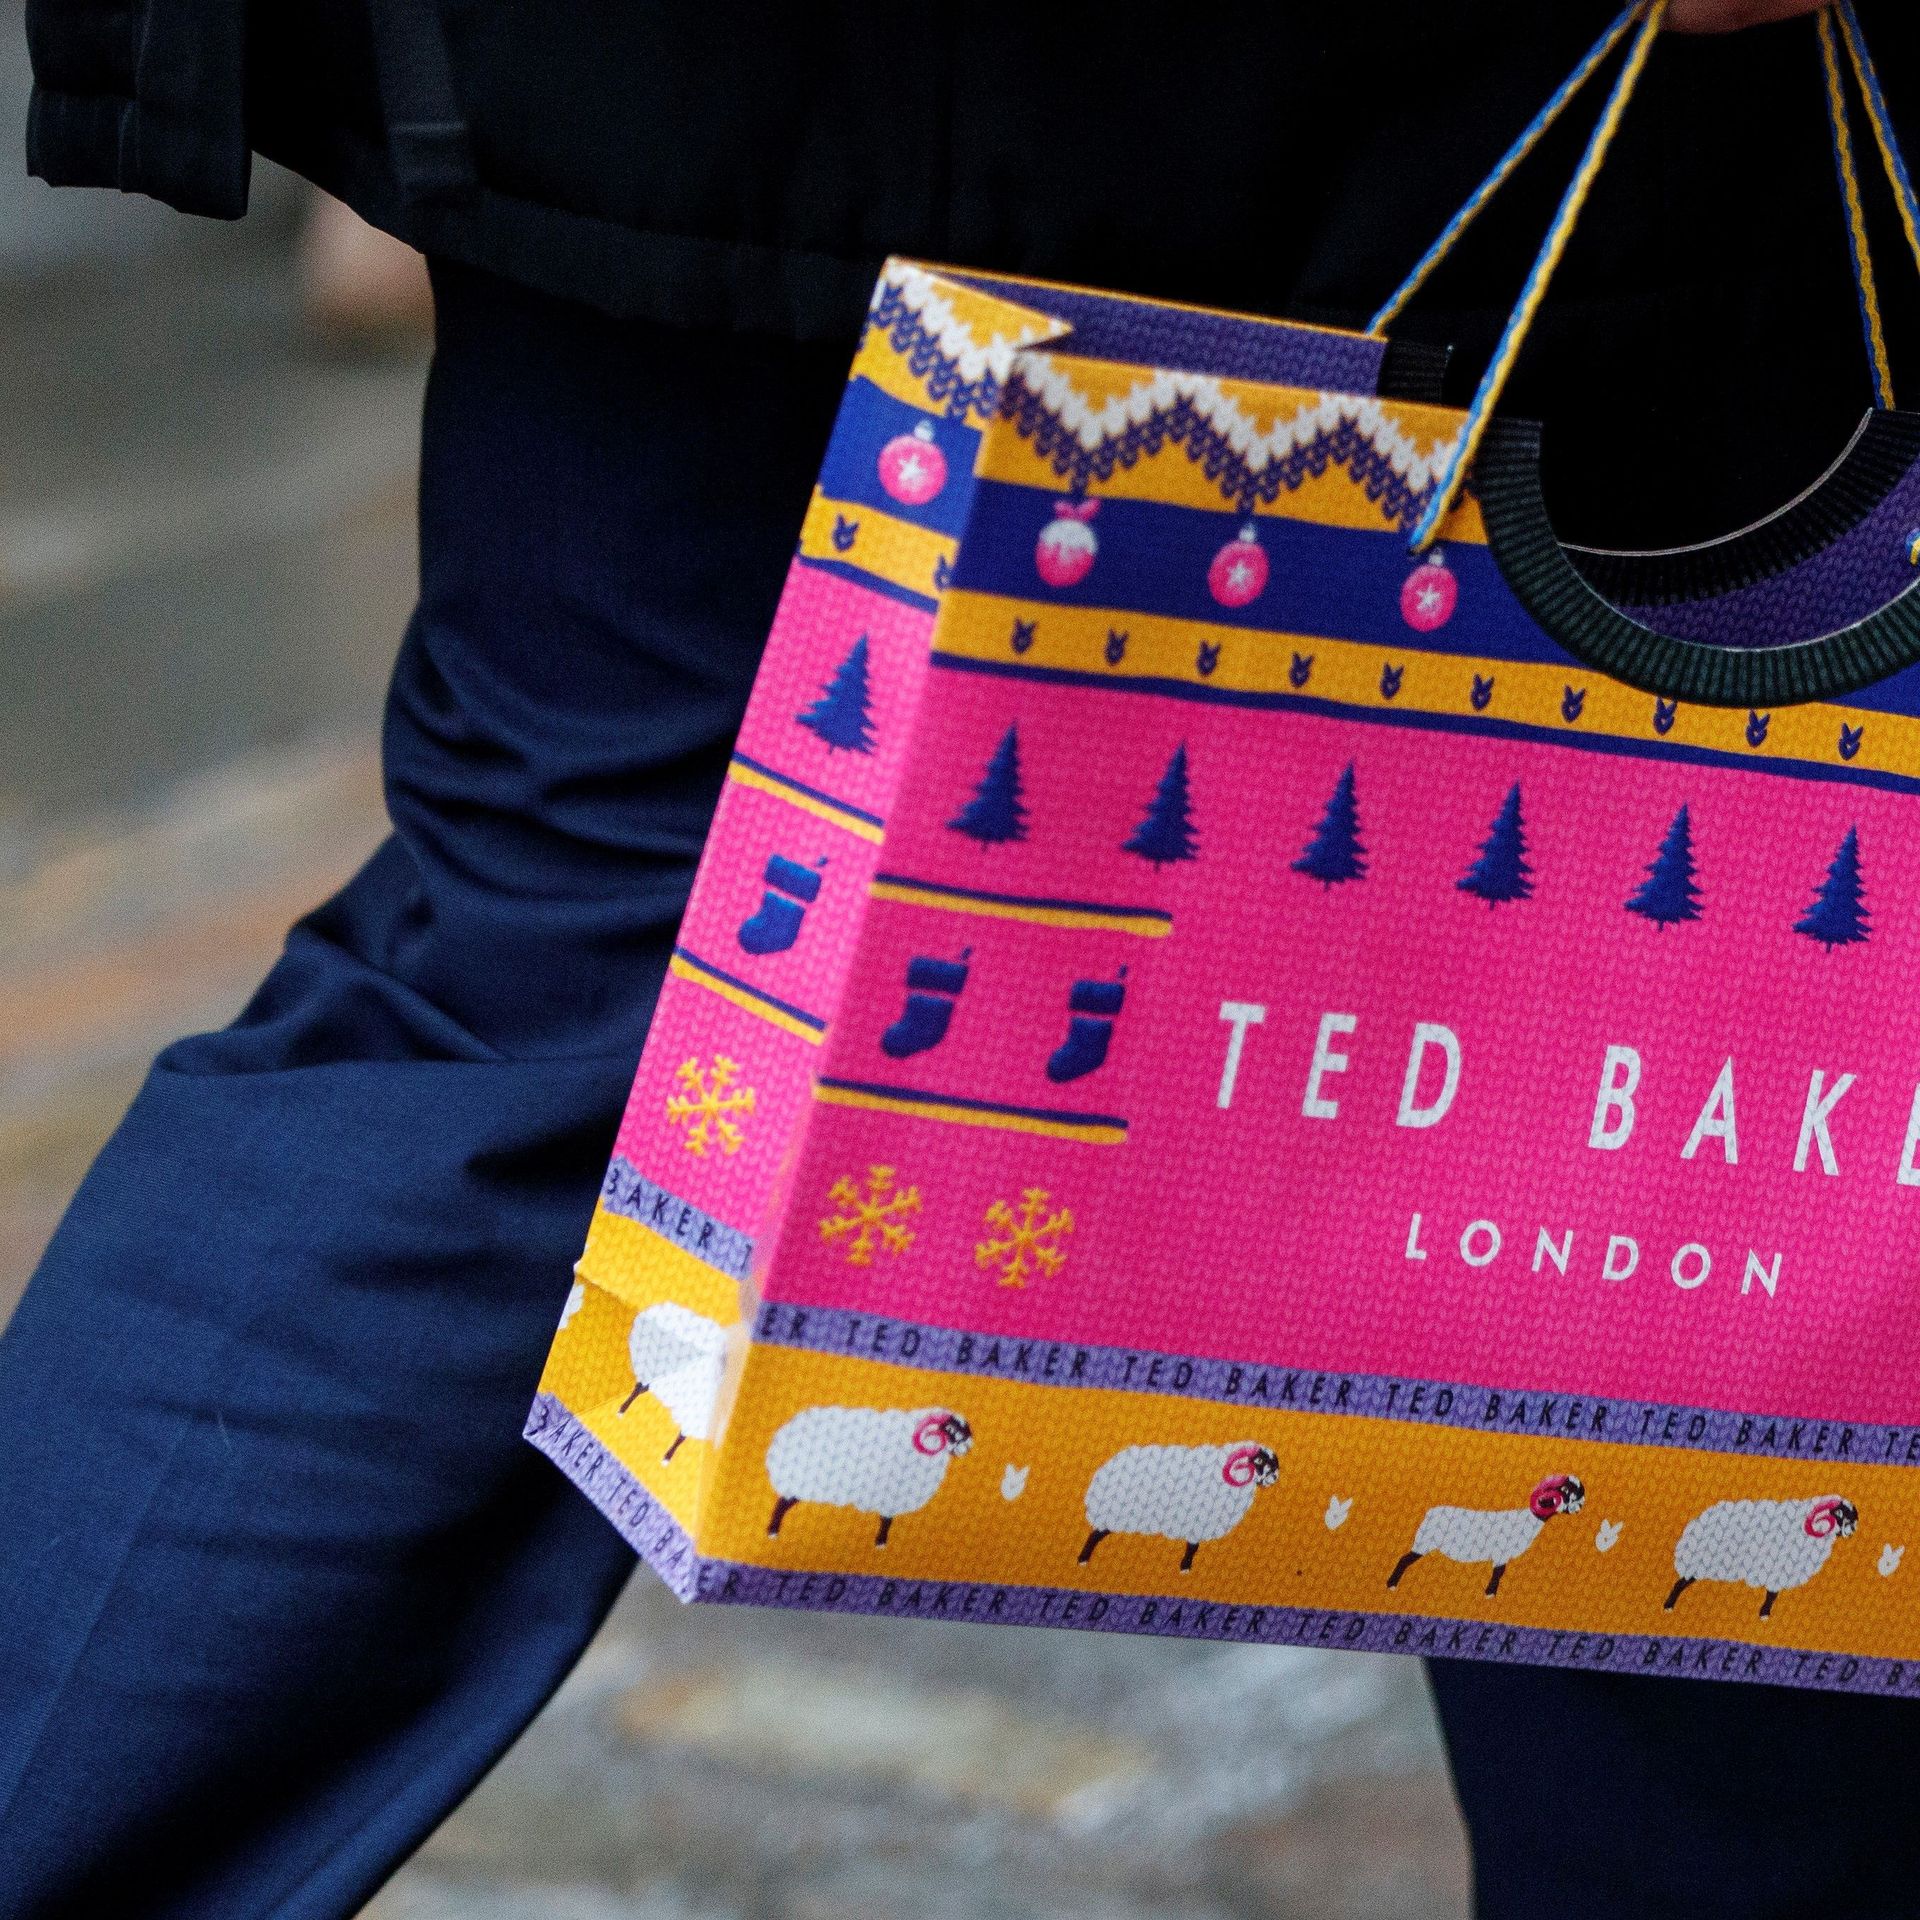 A customer carries a Ted Baker-branded shopping bag after leaving a store in London. Photo: Tolga Akmen/AFP via Getty Images